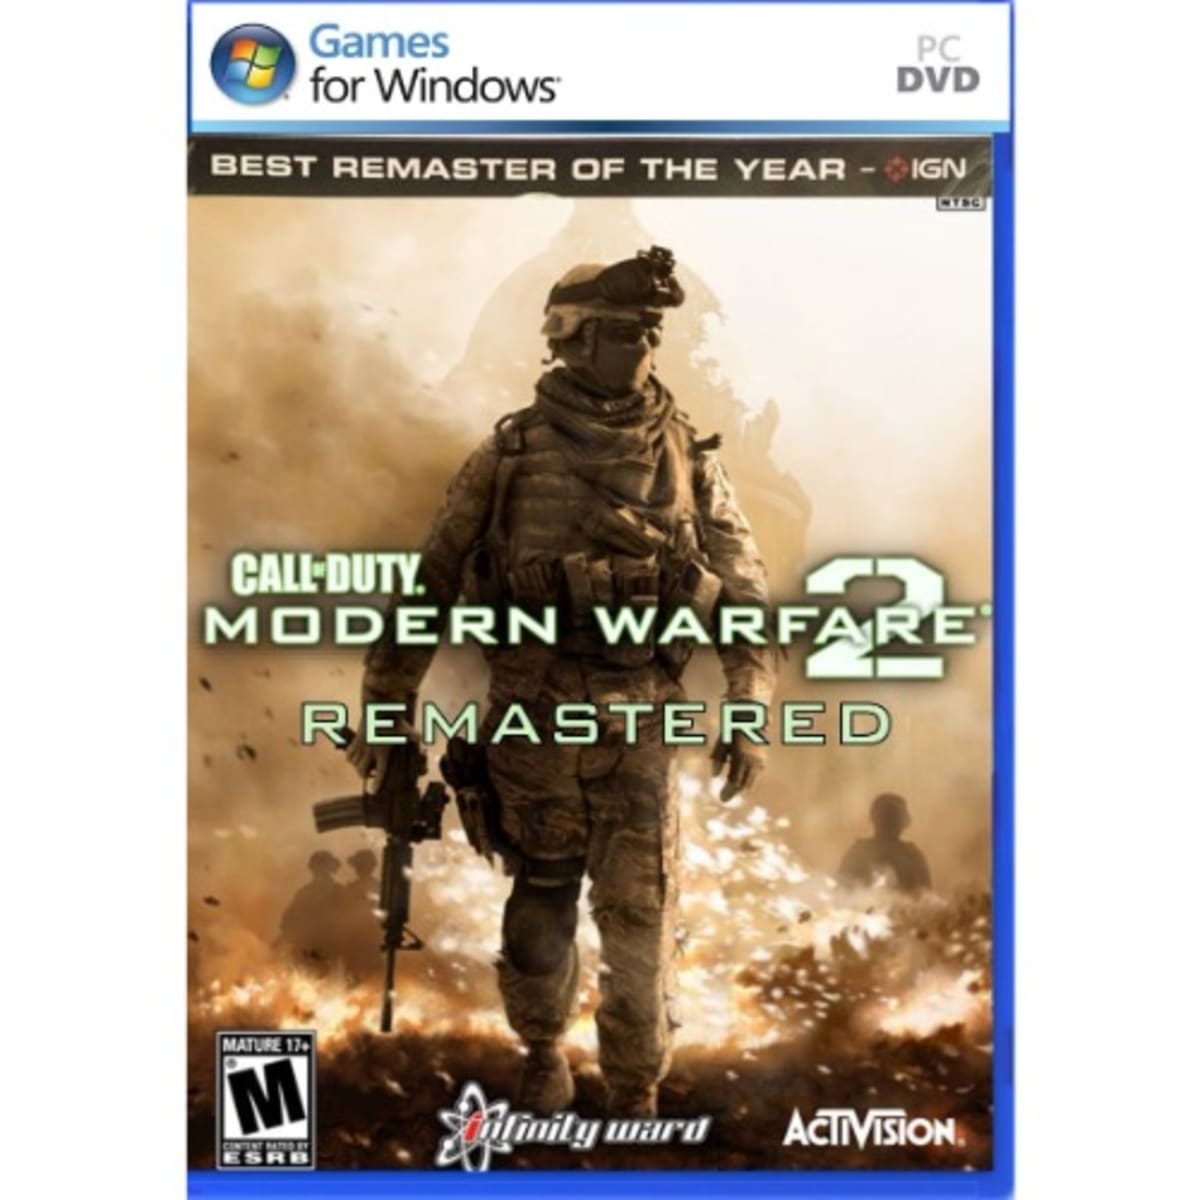 Call Of Duty Modern Warfare 2 Campaign Remastered Free Download